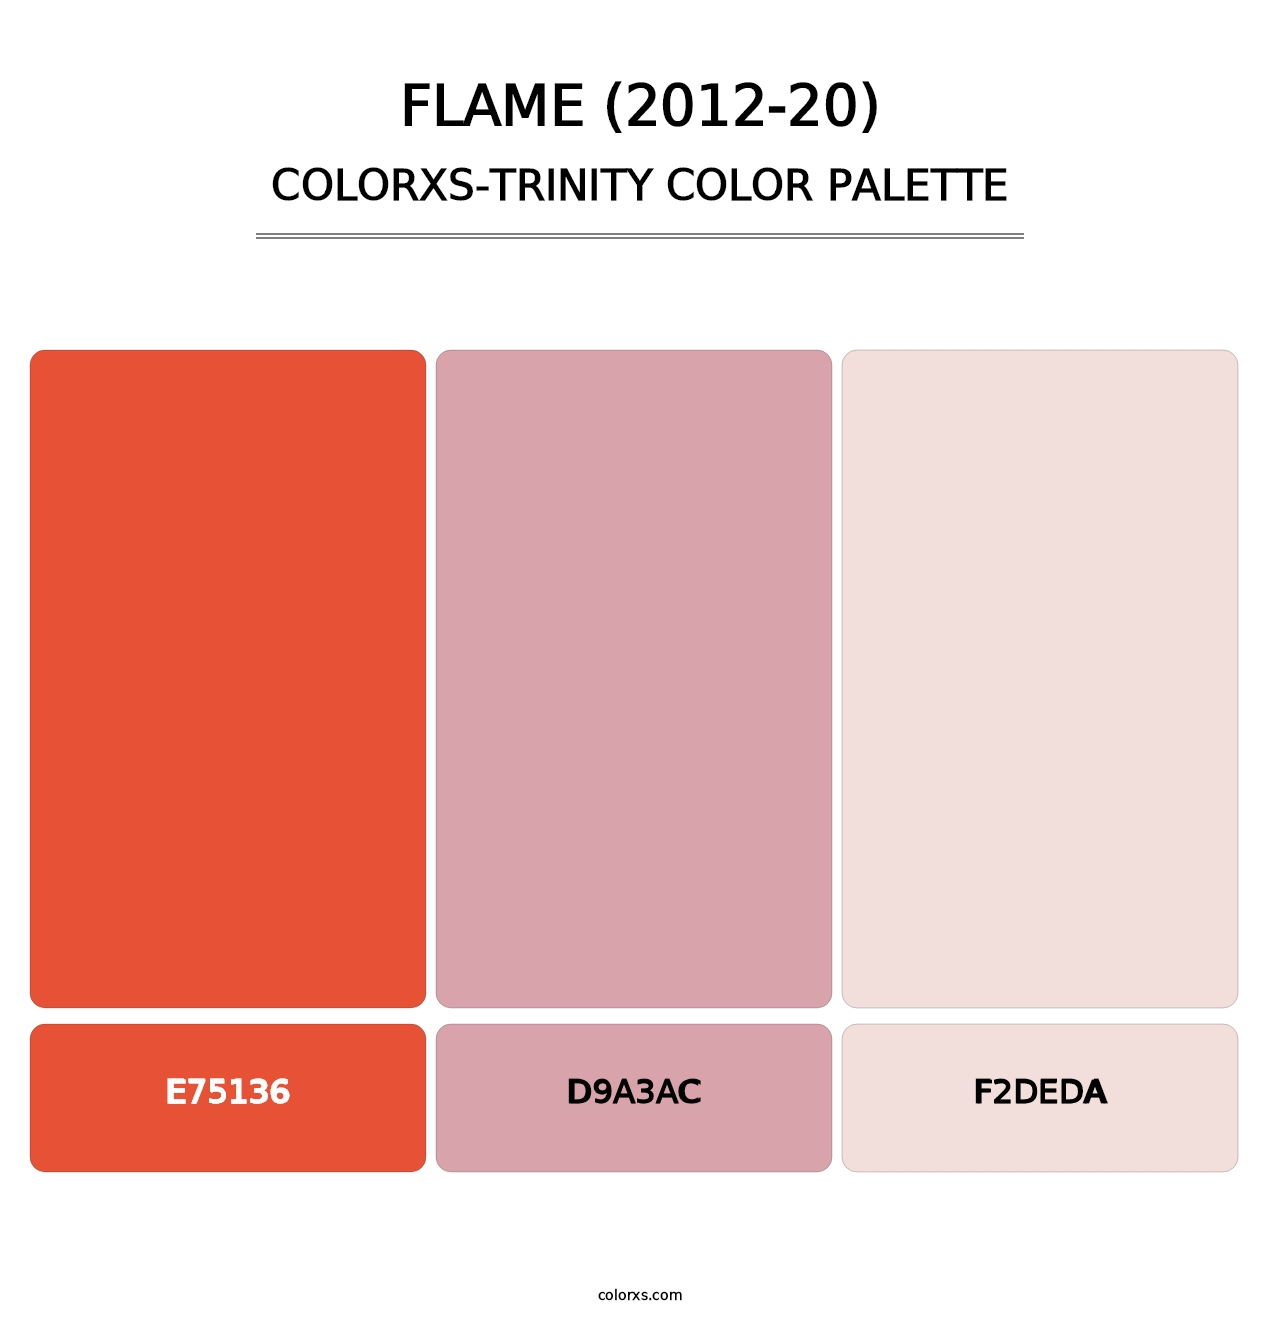 Flame (2012-20) - Colorxs Trinity Palette